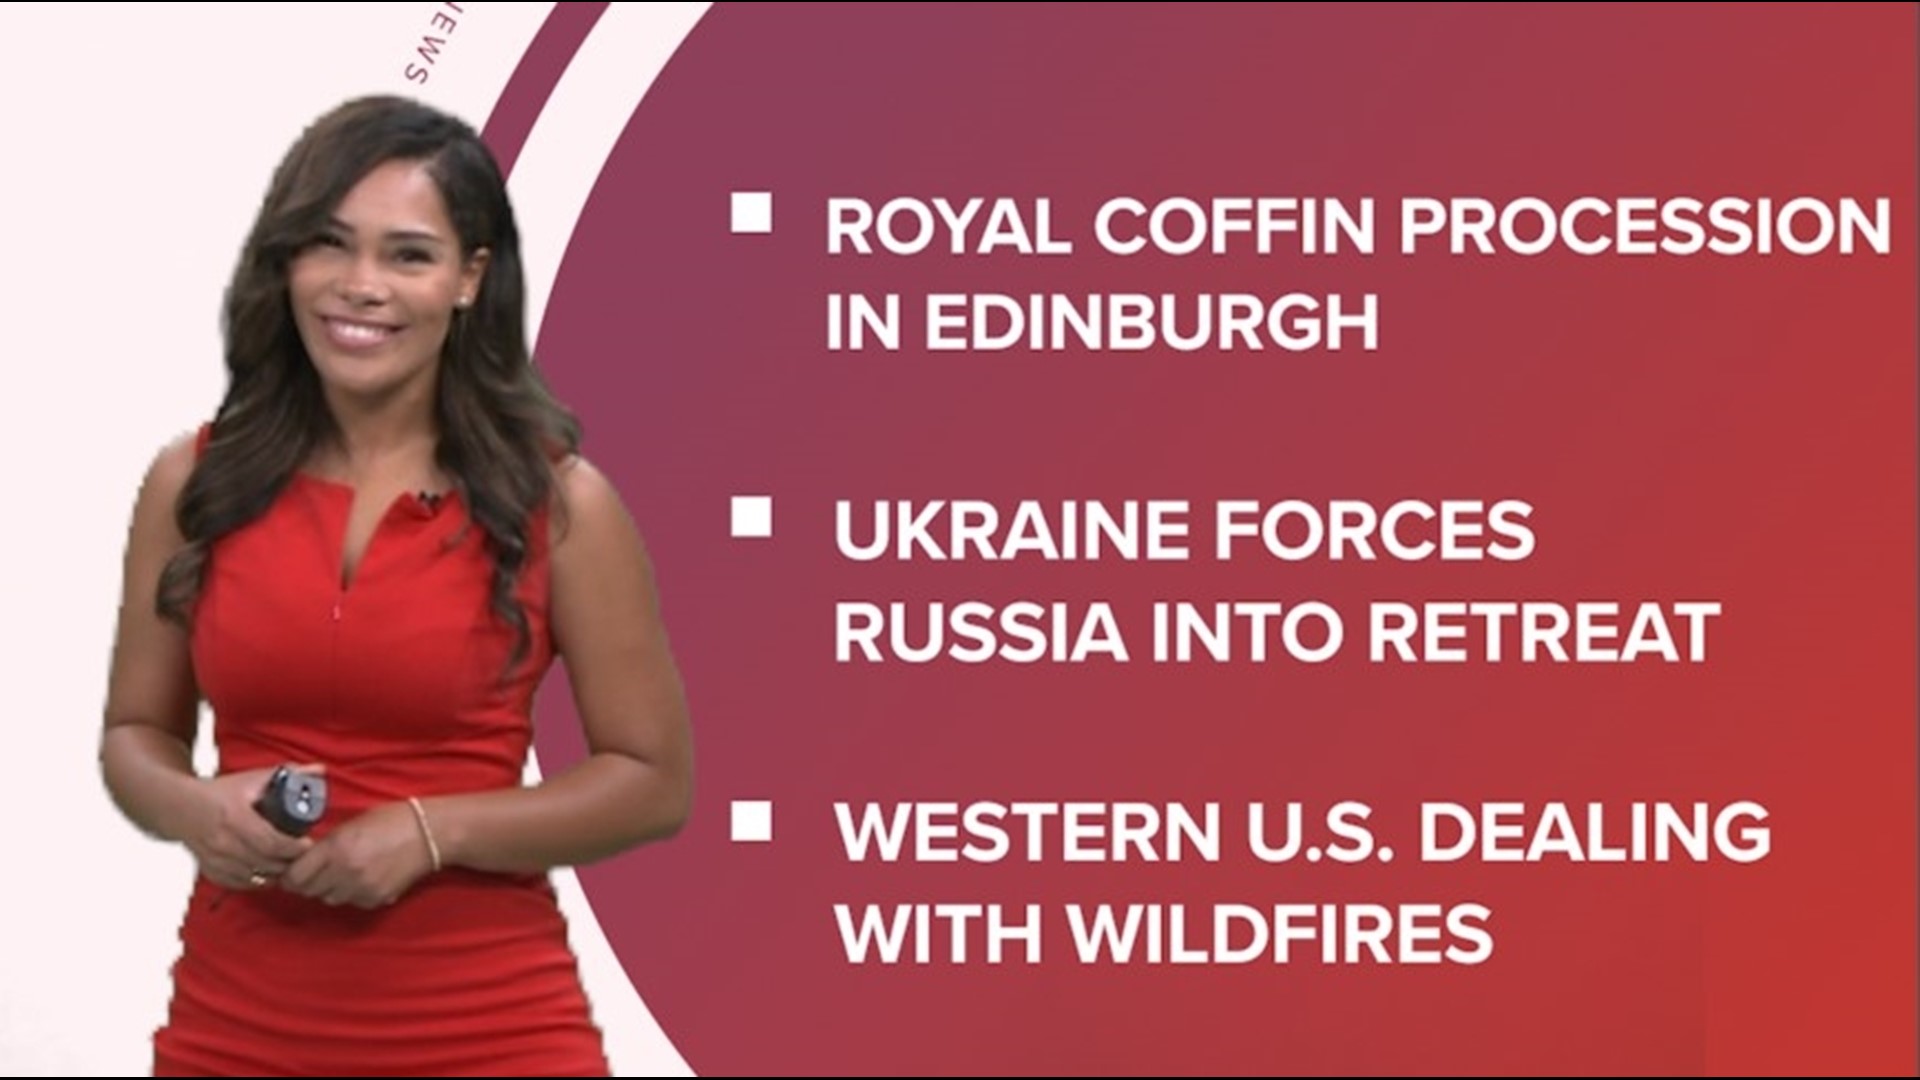 A look at what is happening in the news from King Charles addressing parliament to Russia strikes hitting Ukraine power plants and getting ready for the 2022 Emmys.